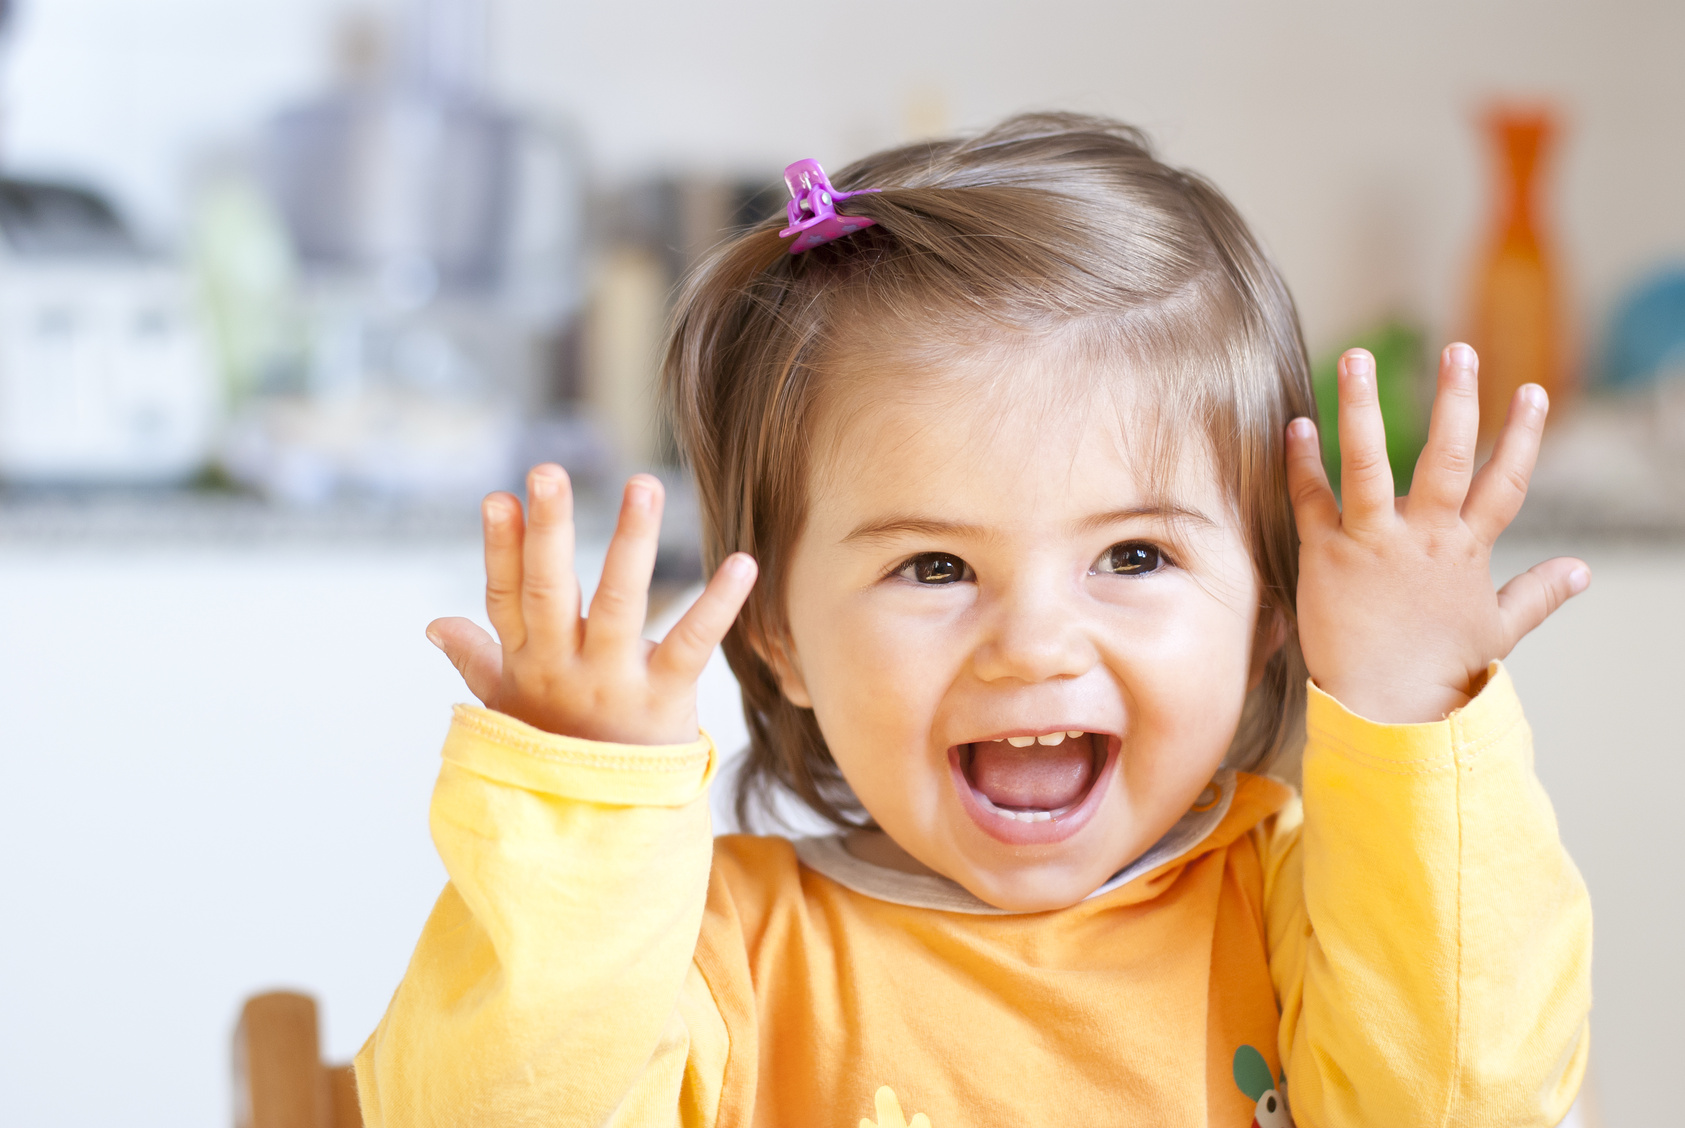 Smiling toddler in yellow jumper holding her hands up